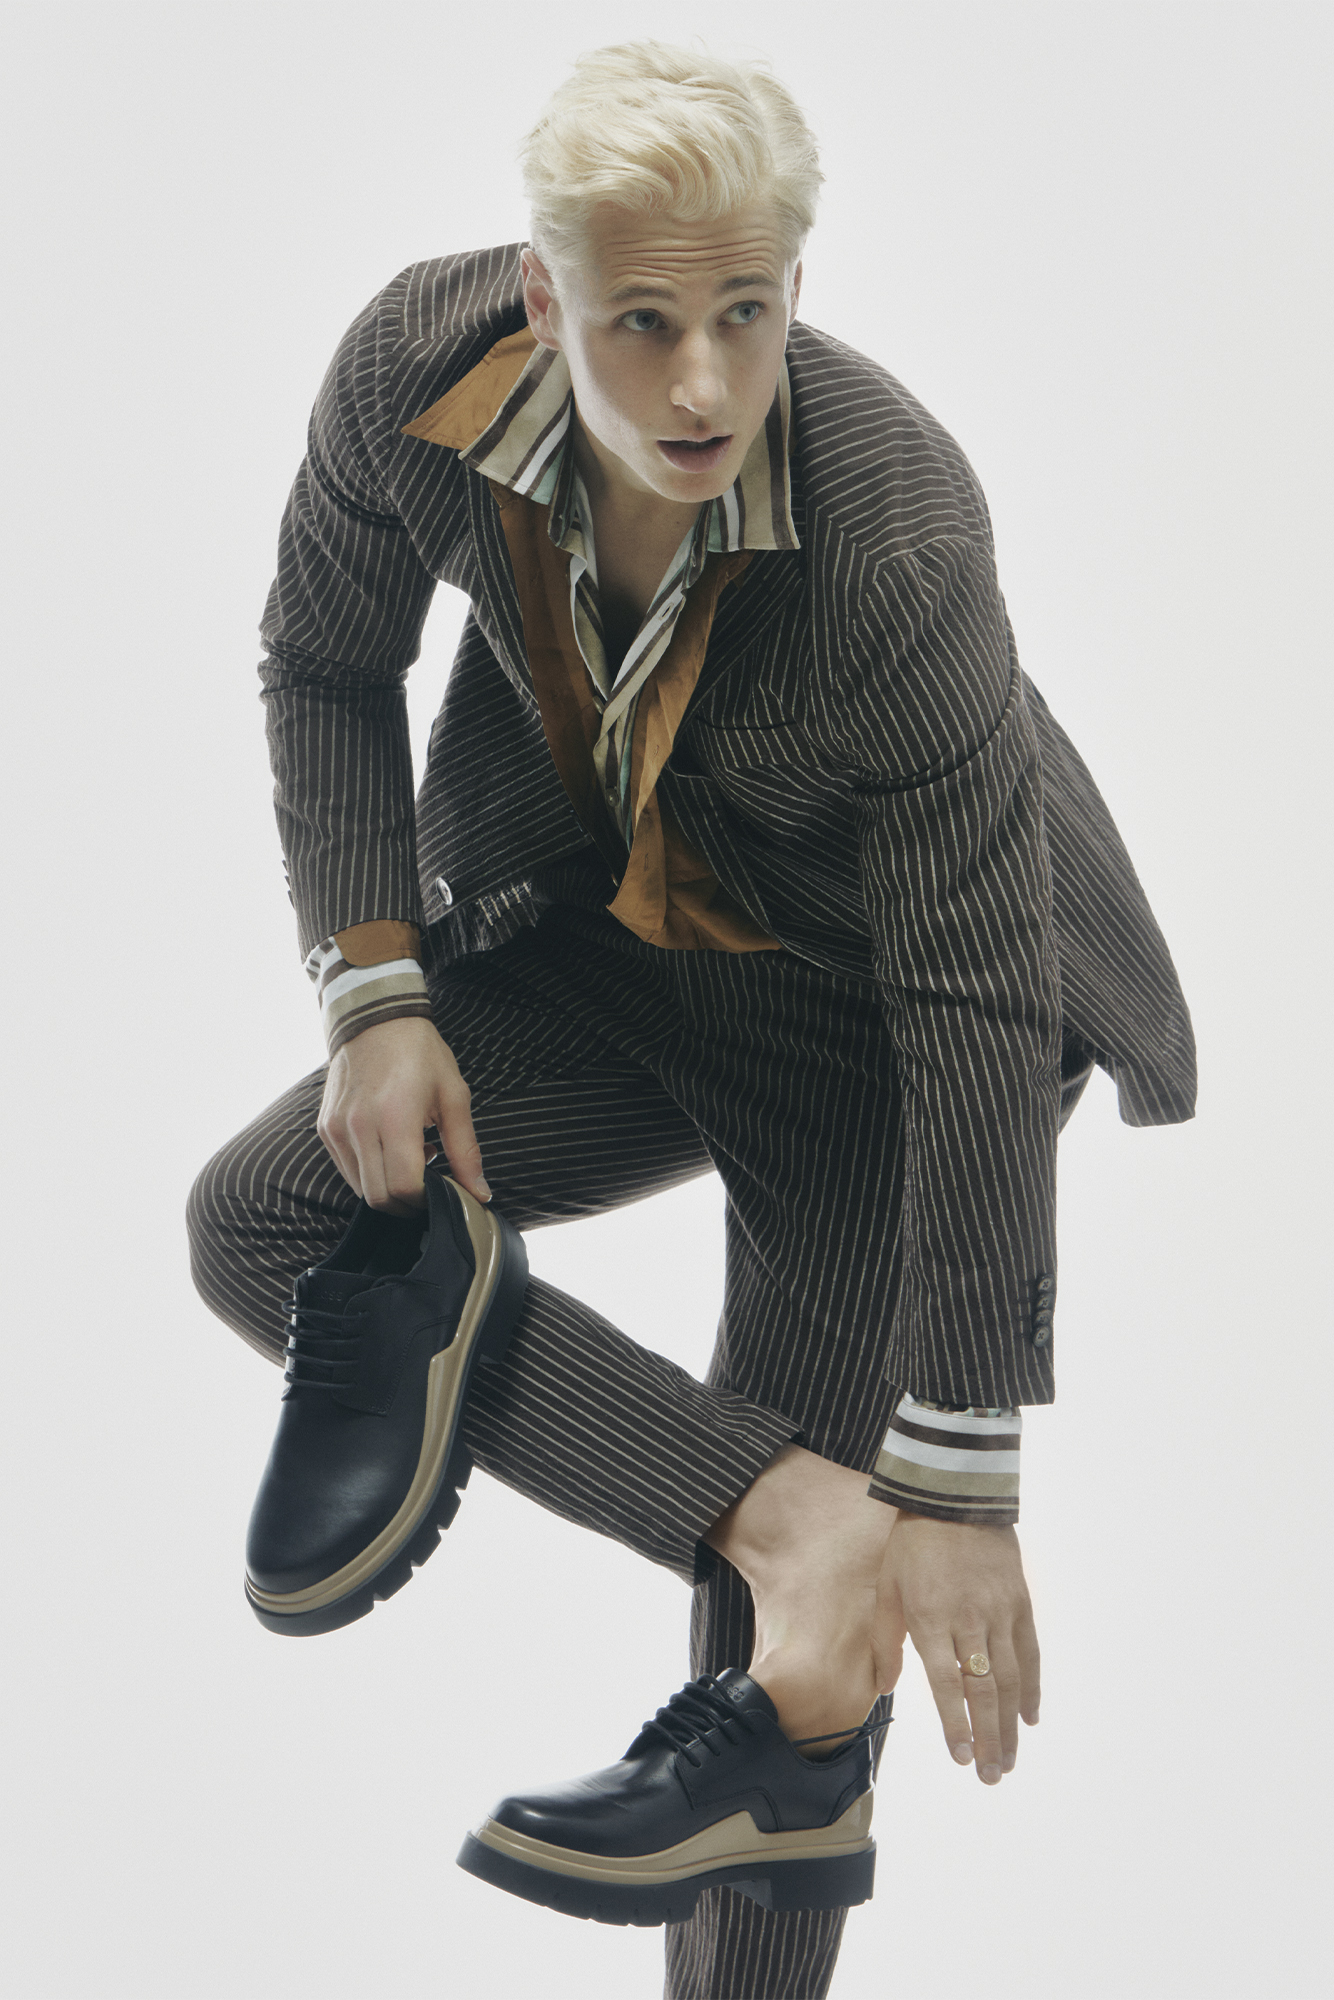 Male model in brown jacket reaching down to put on shoe while standing